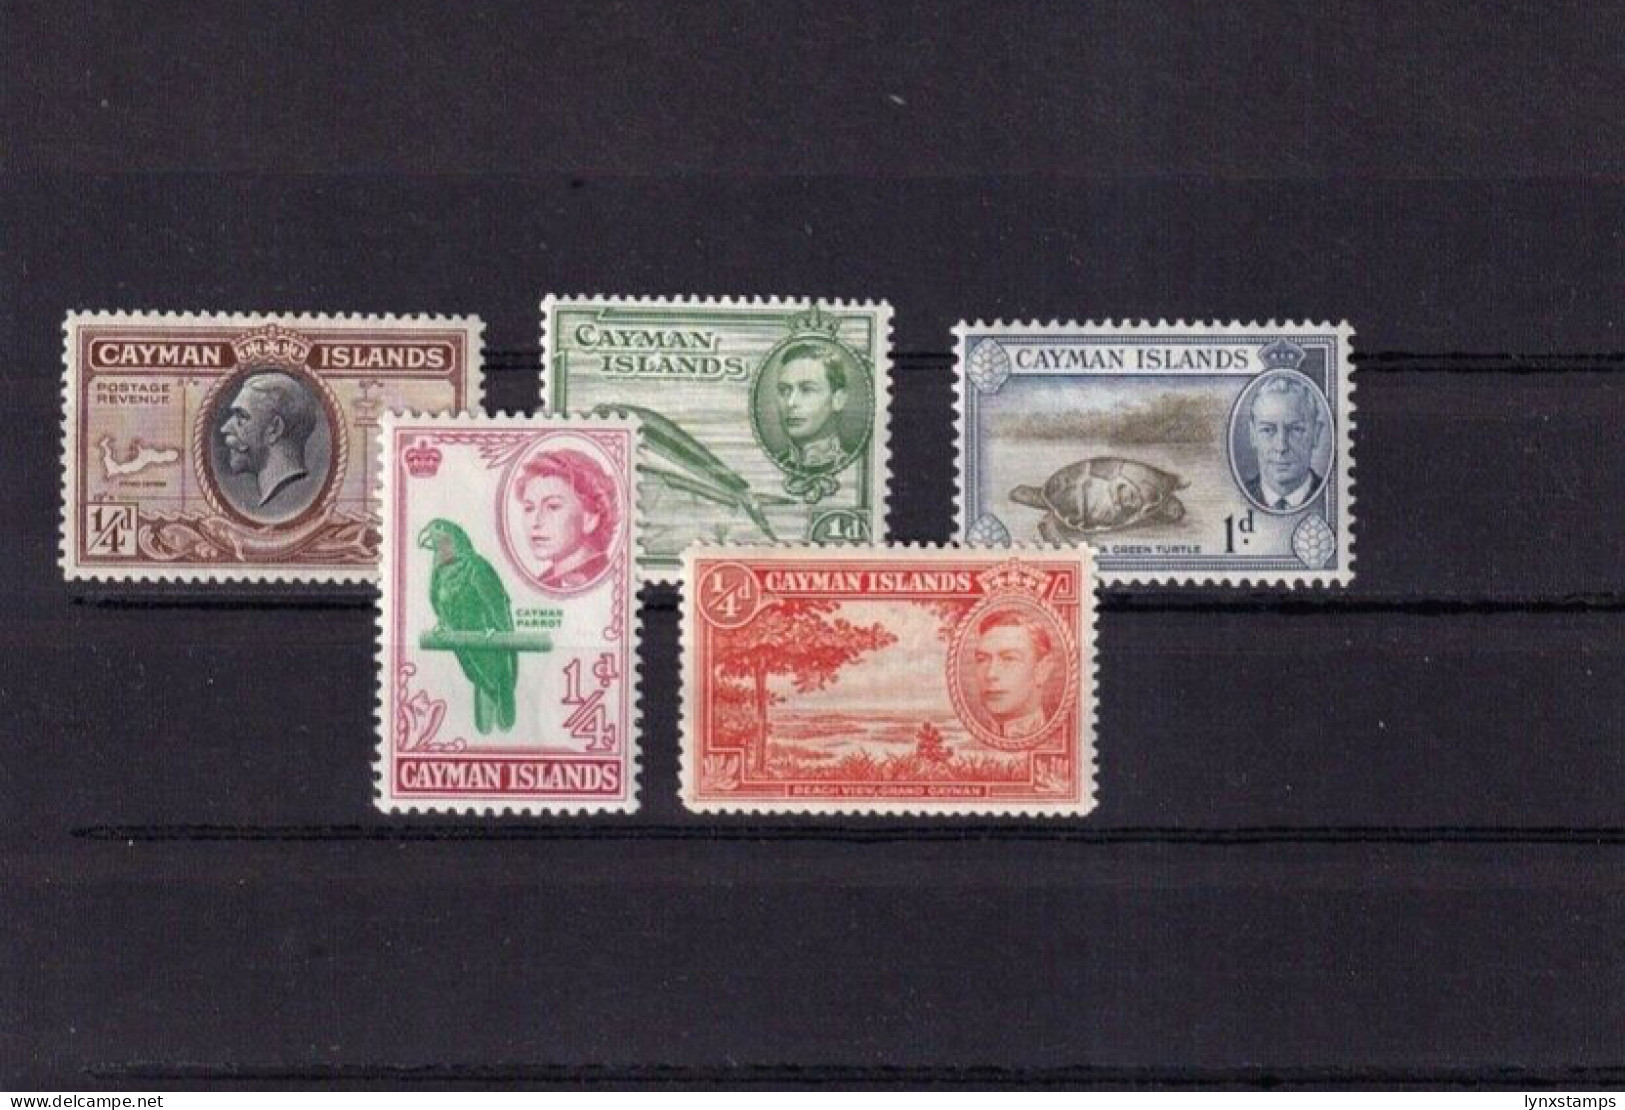 G022 Cayman Islands Mint Stamps Selection - Kaimaninseln